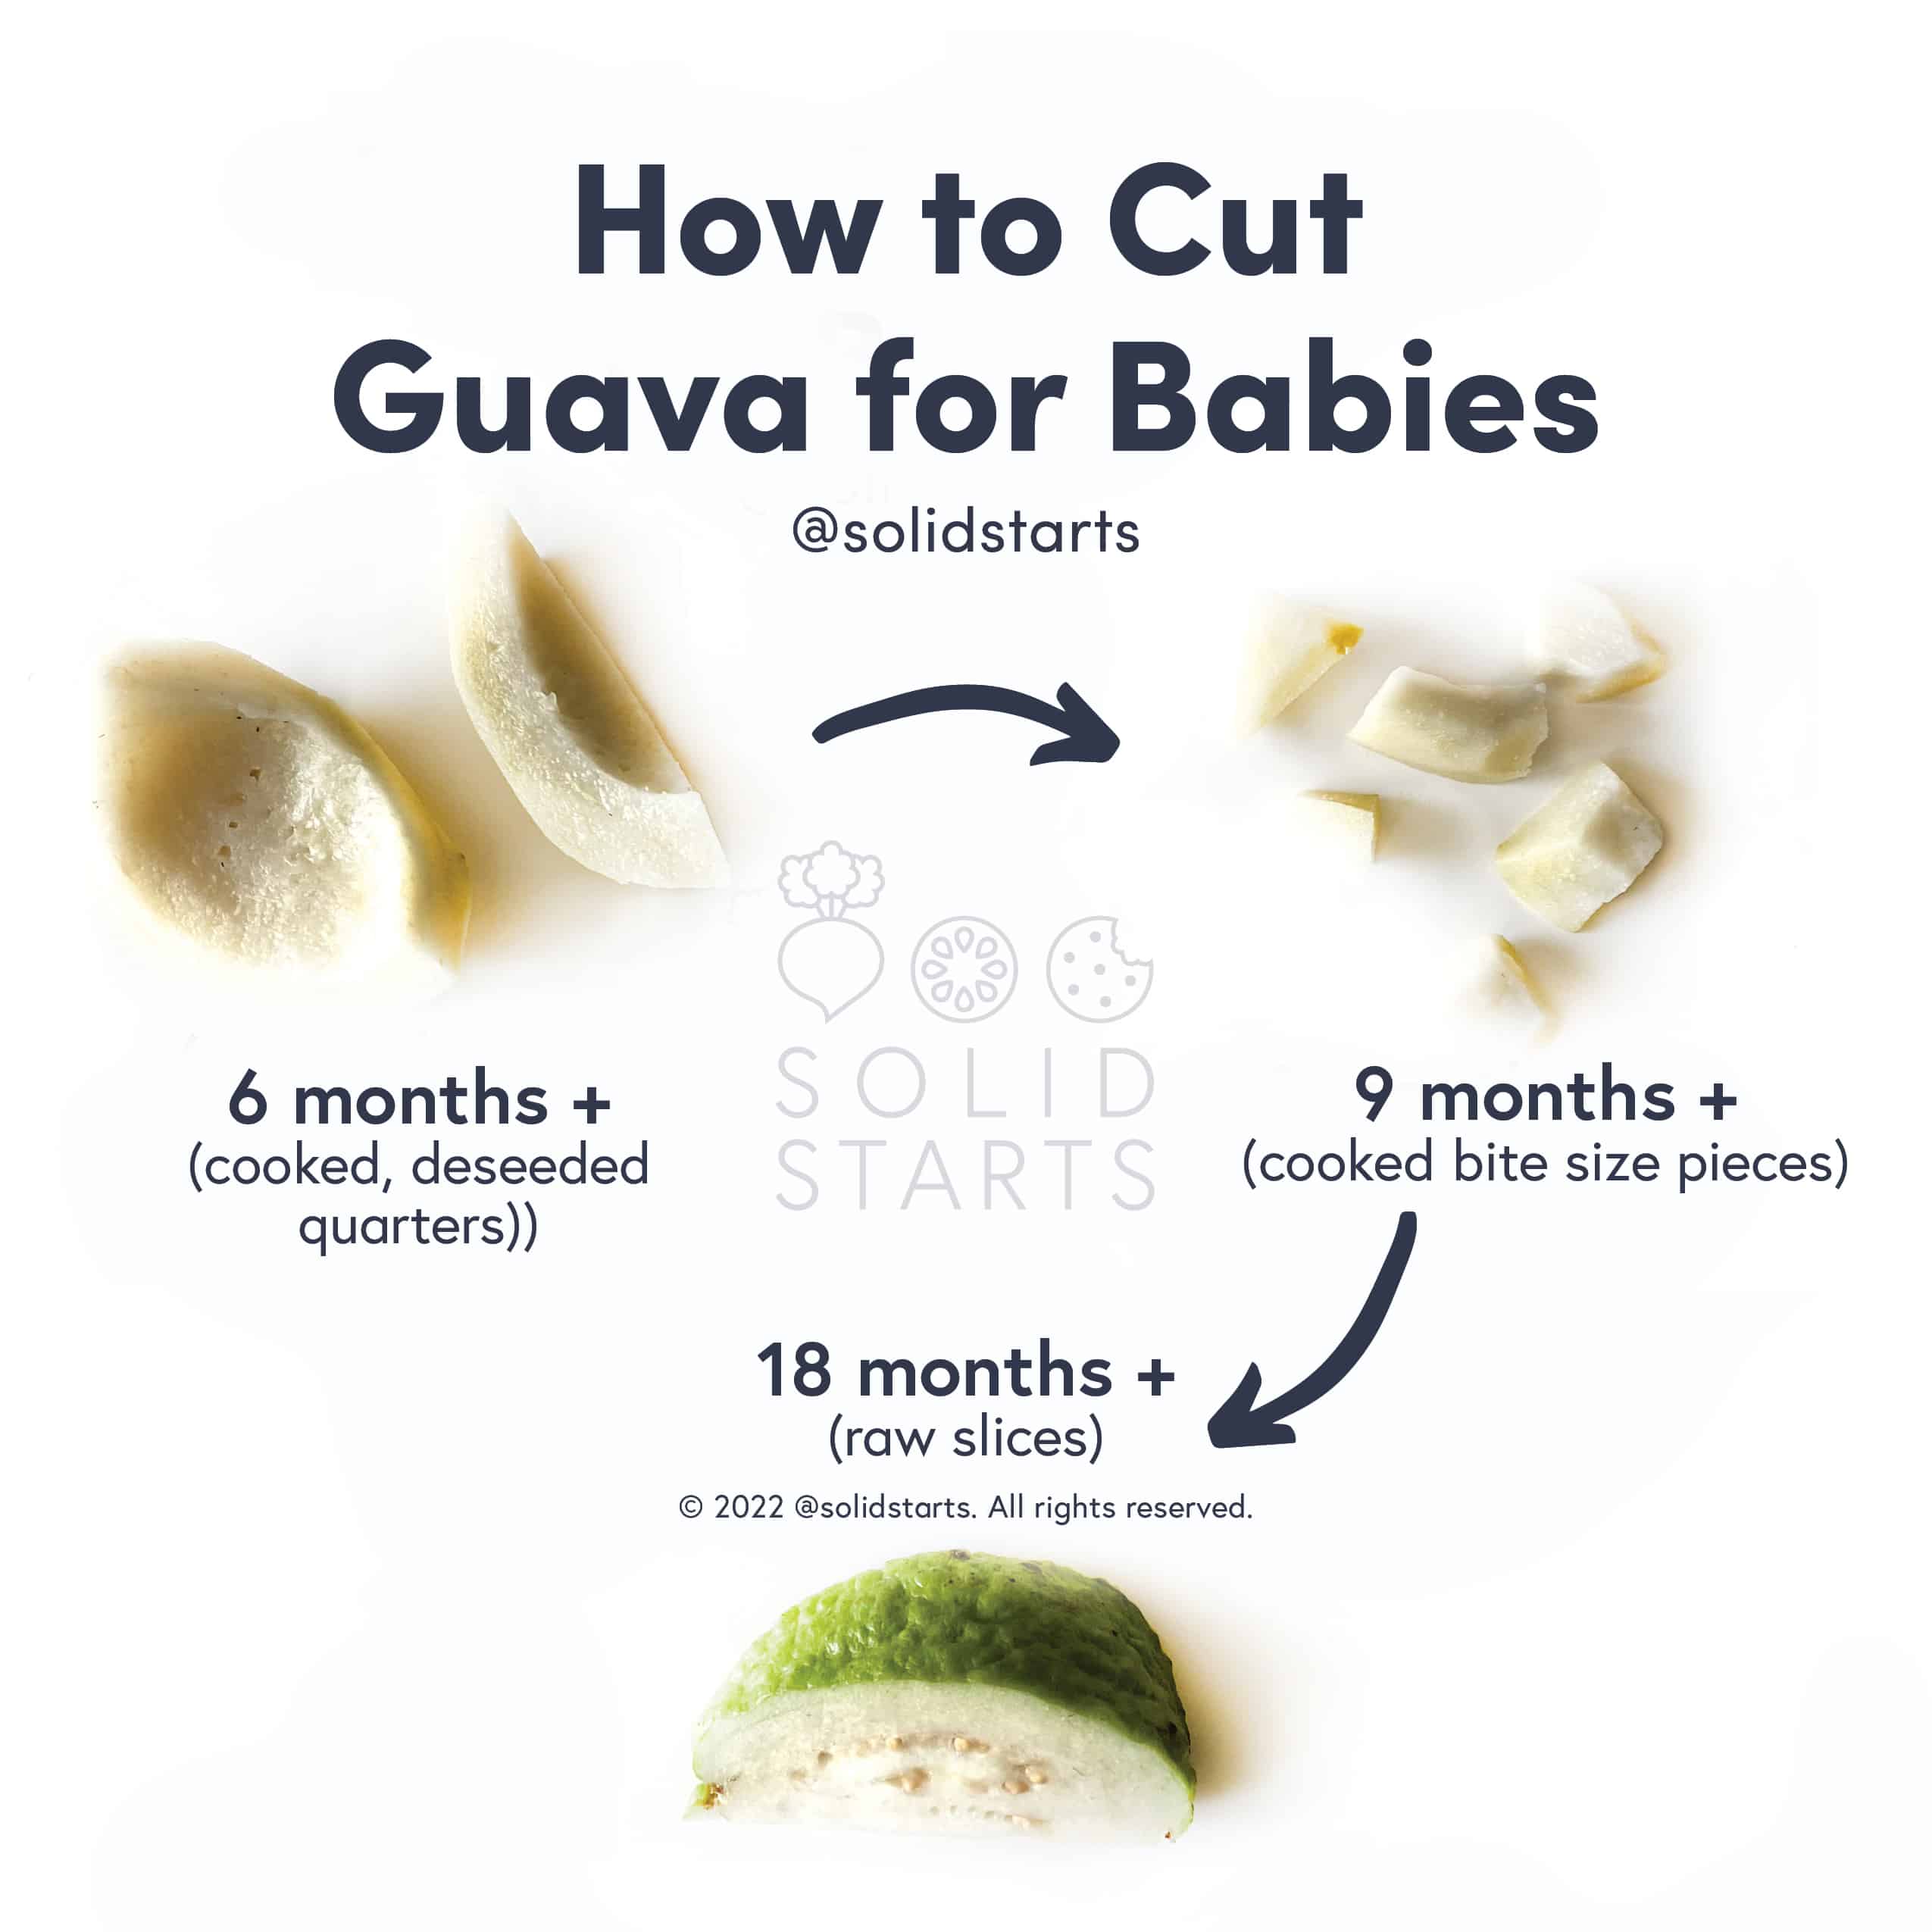 How to Cut Guava for Babies